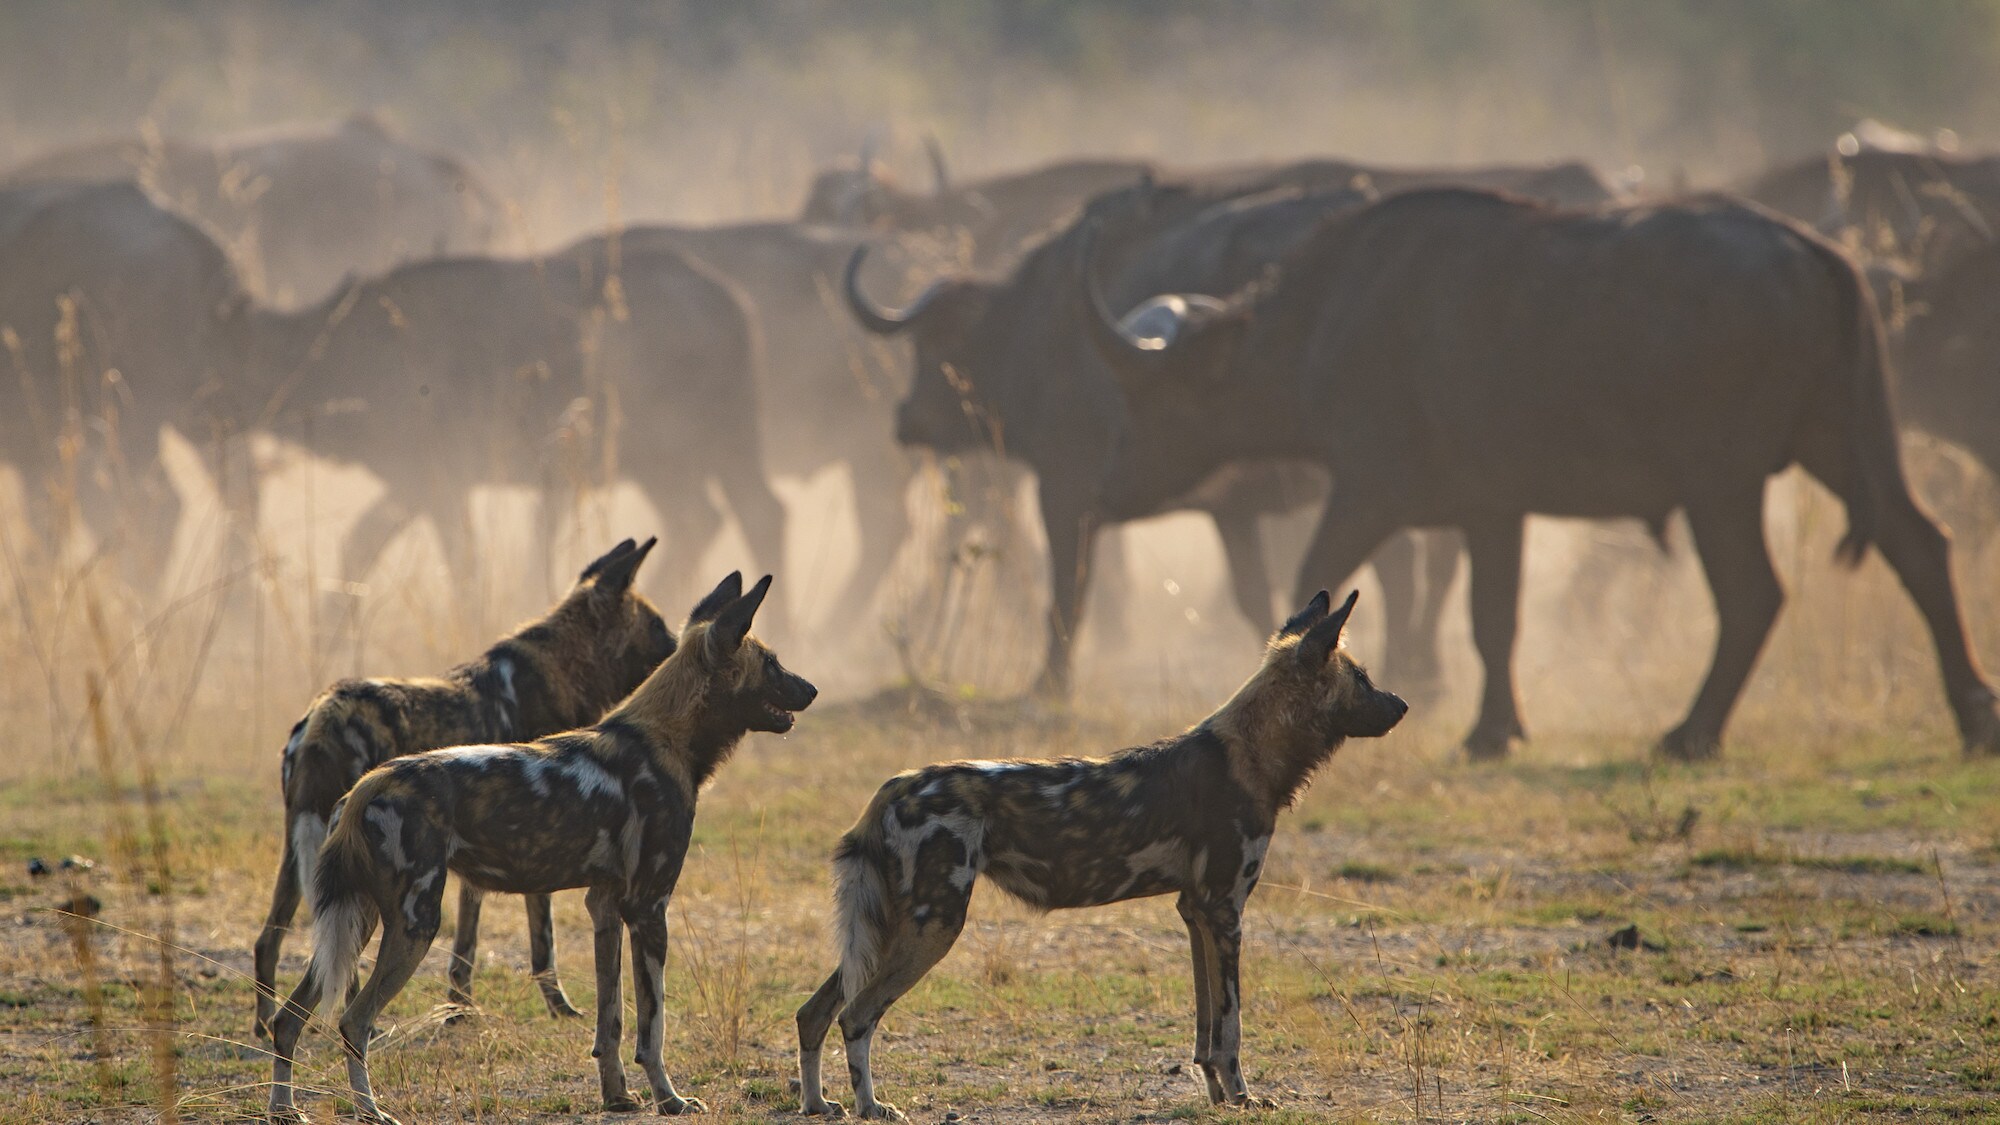 Dusty shot of three Wild Dogs facing a herd of Wildebeest. (National Geographic for Disney+/Anna Dimitriadis)